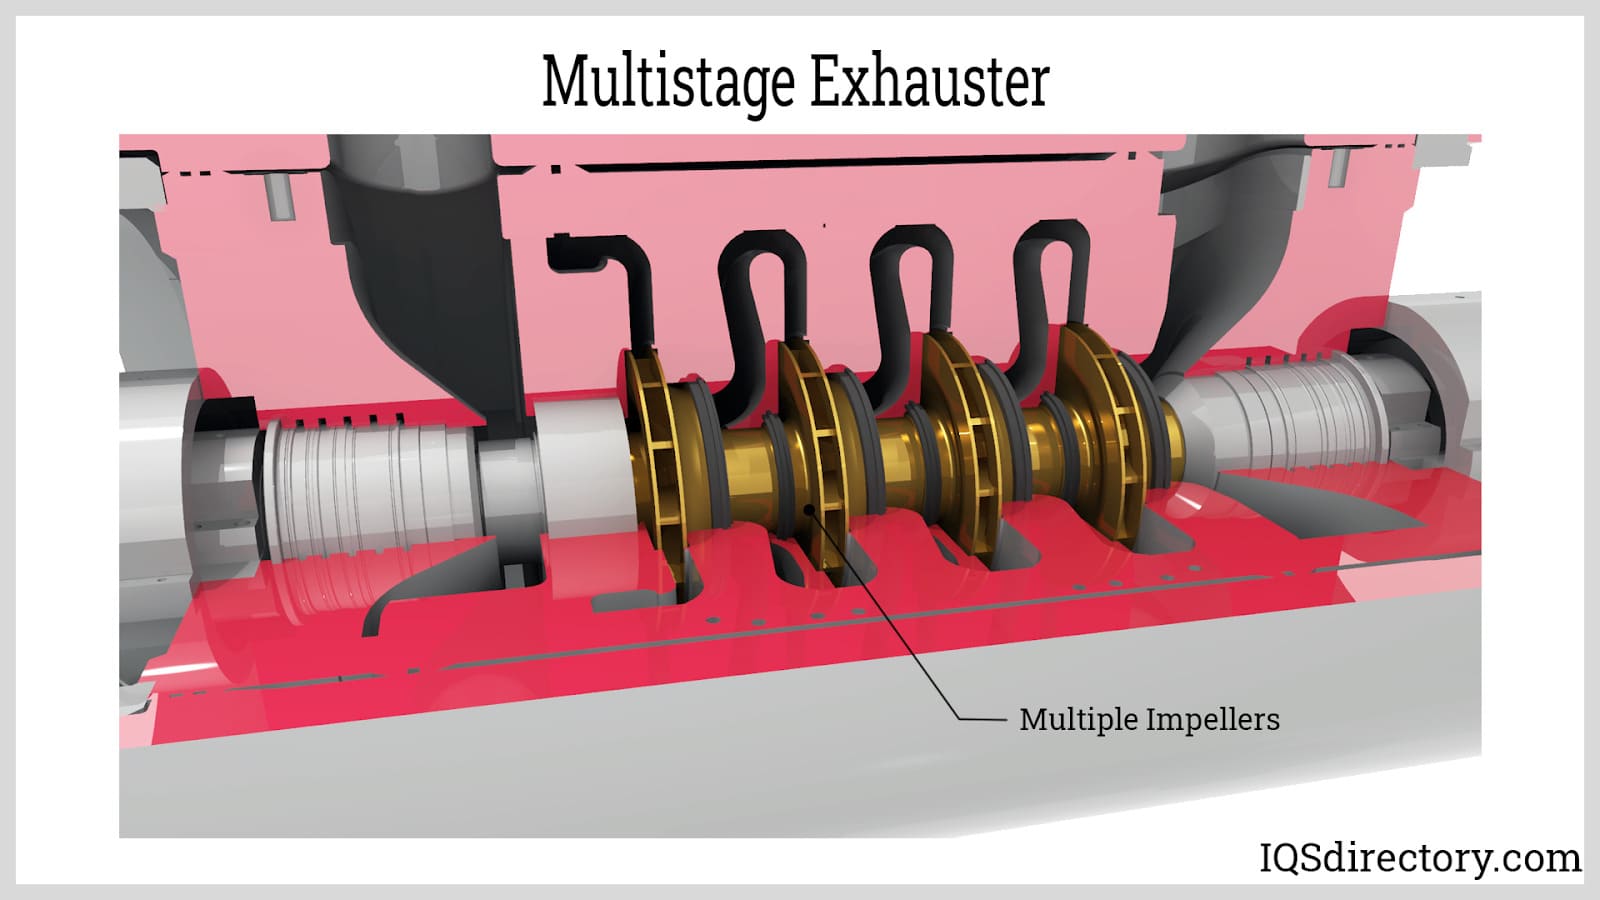 Multistage Exhauster